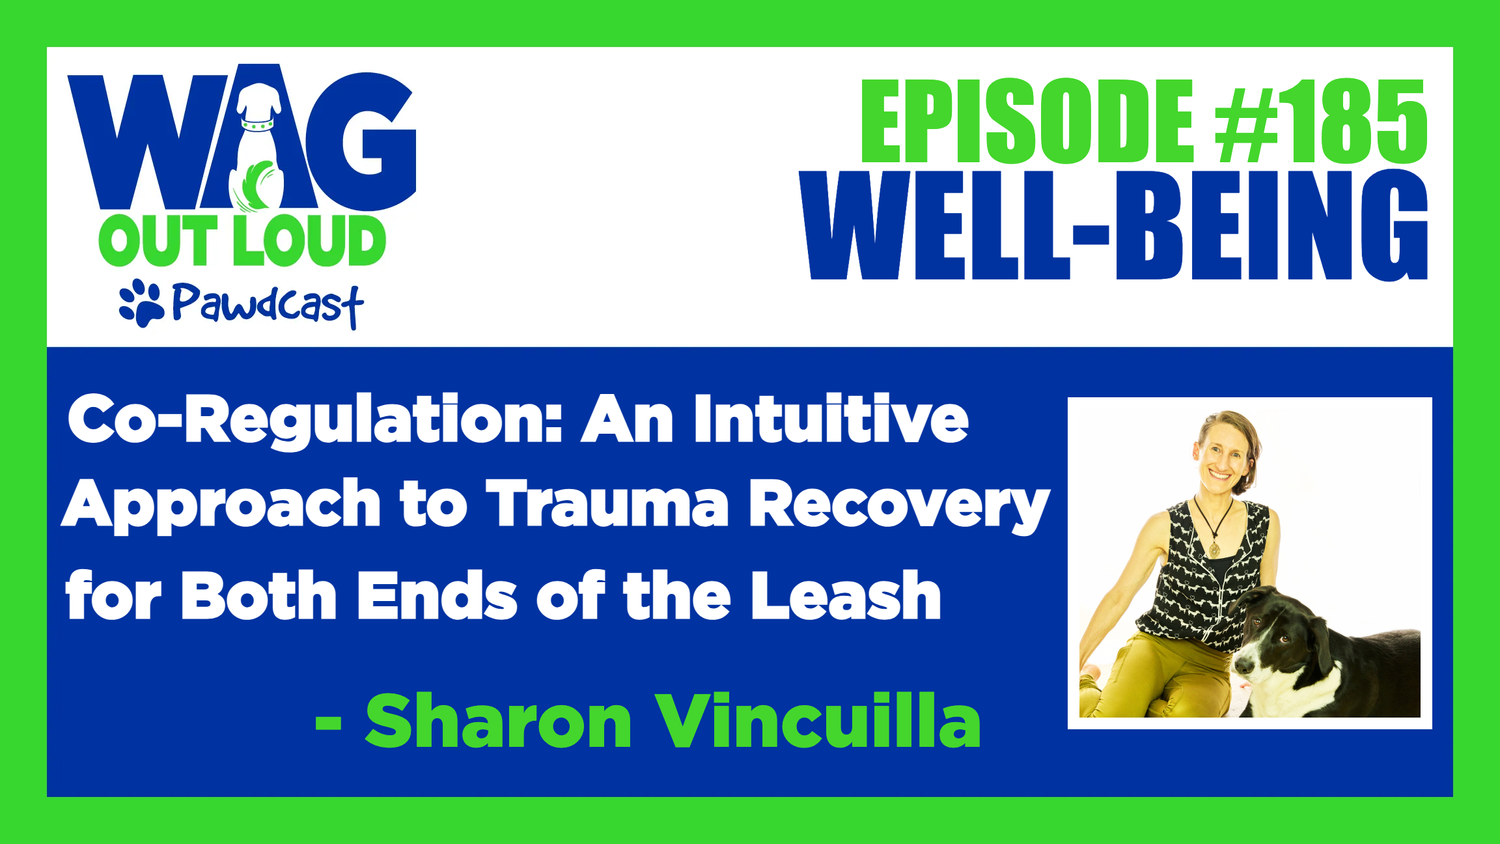 Co-Regulation: An Intuitive Approach to Trauma Recovery for Both Ends of the Leash